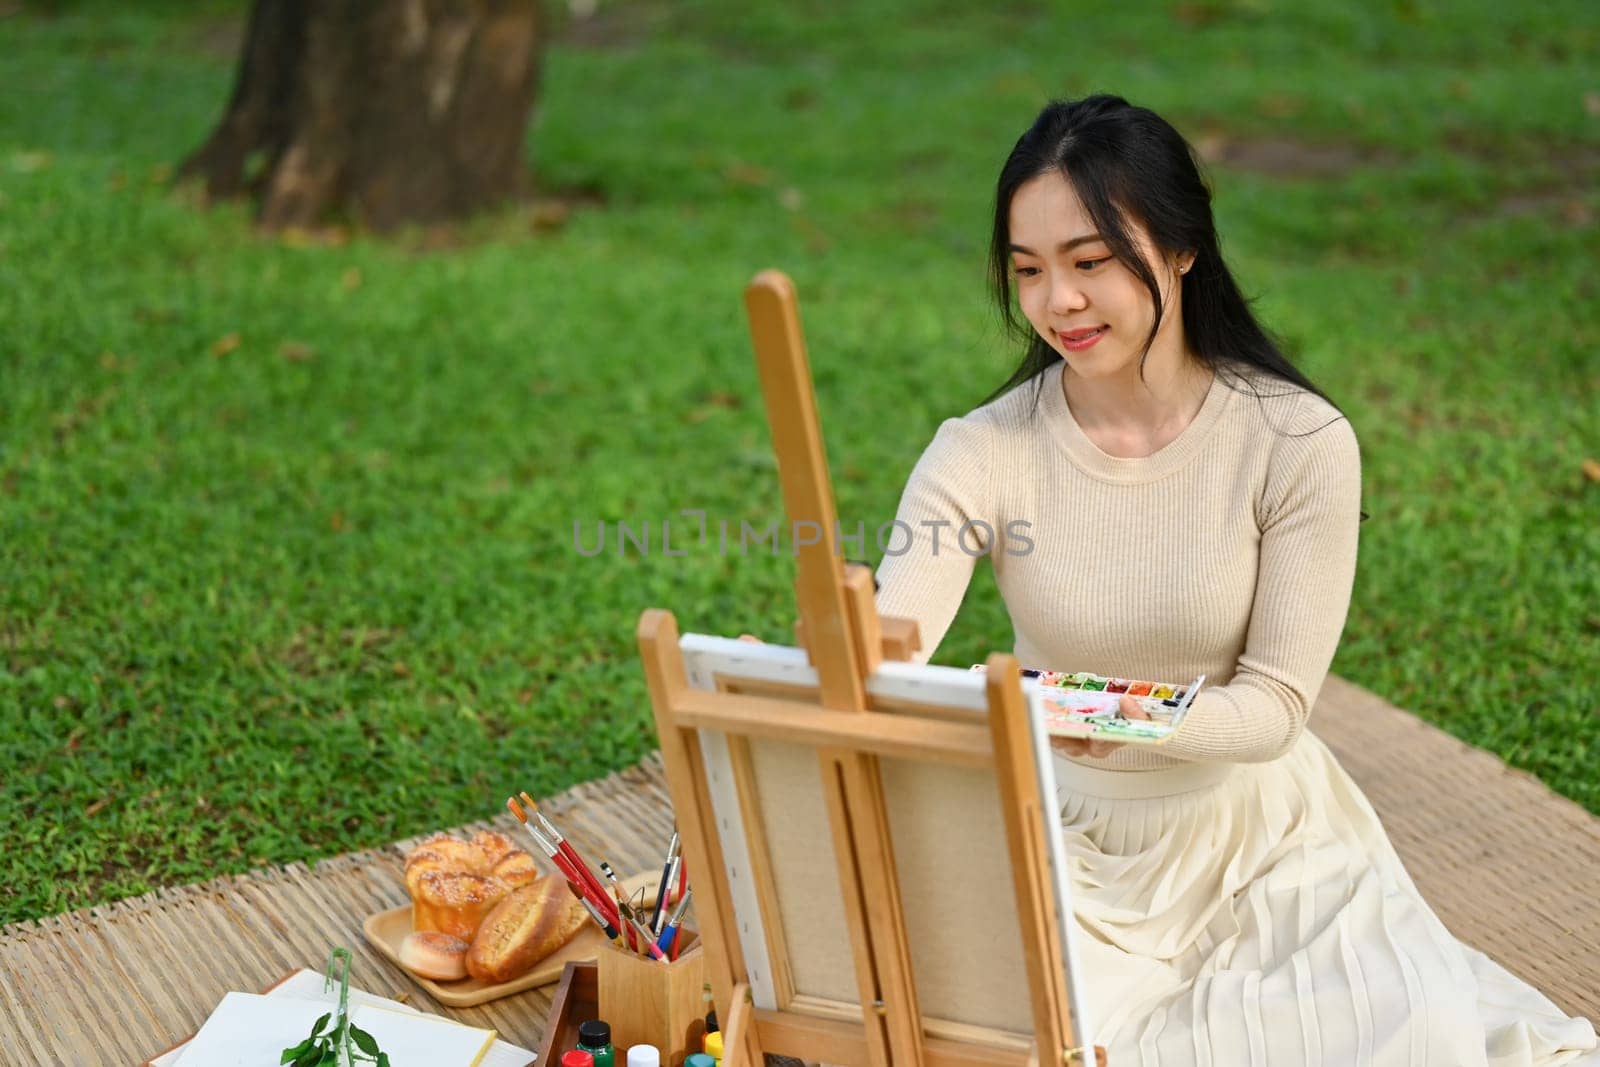 Attractive young woman painting picture on easel outdoors. Mindfulness, art therapy and creative hobbies concept.